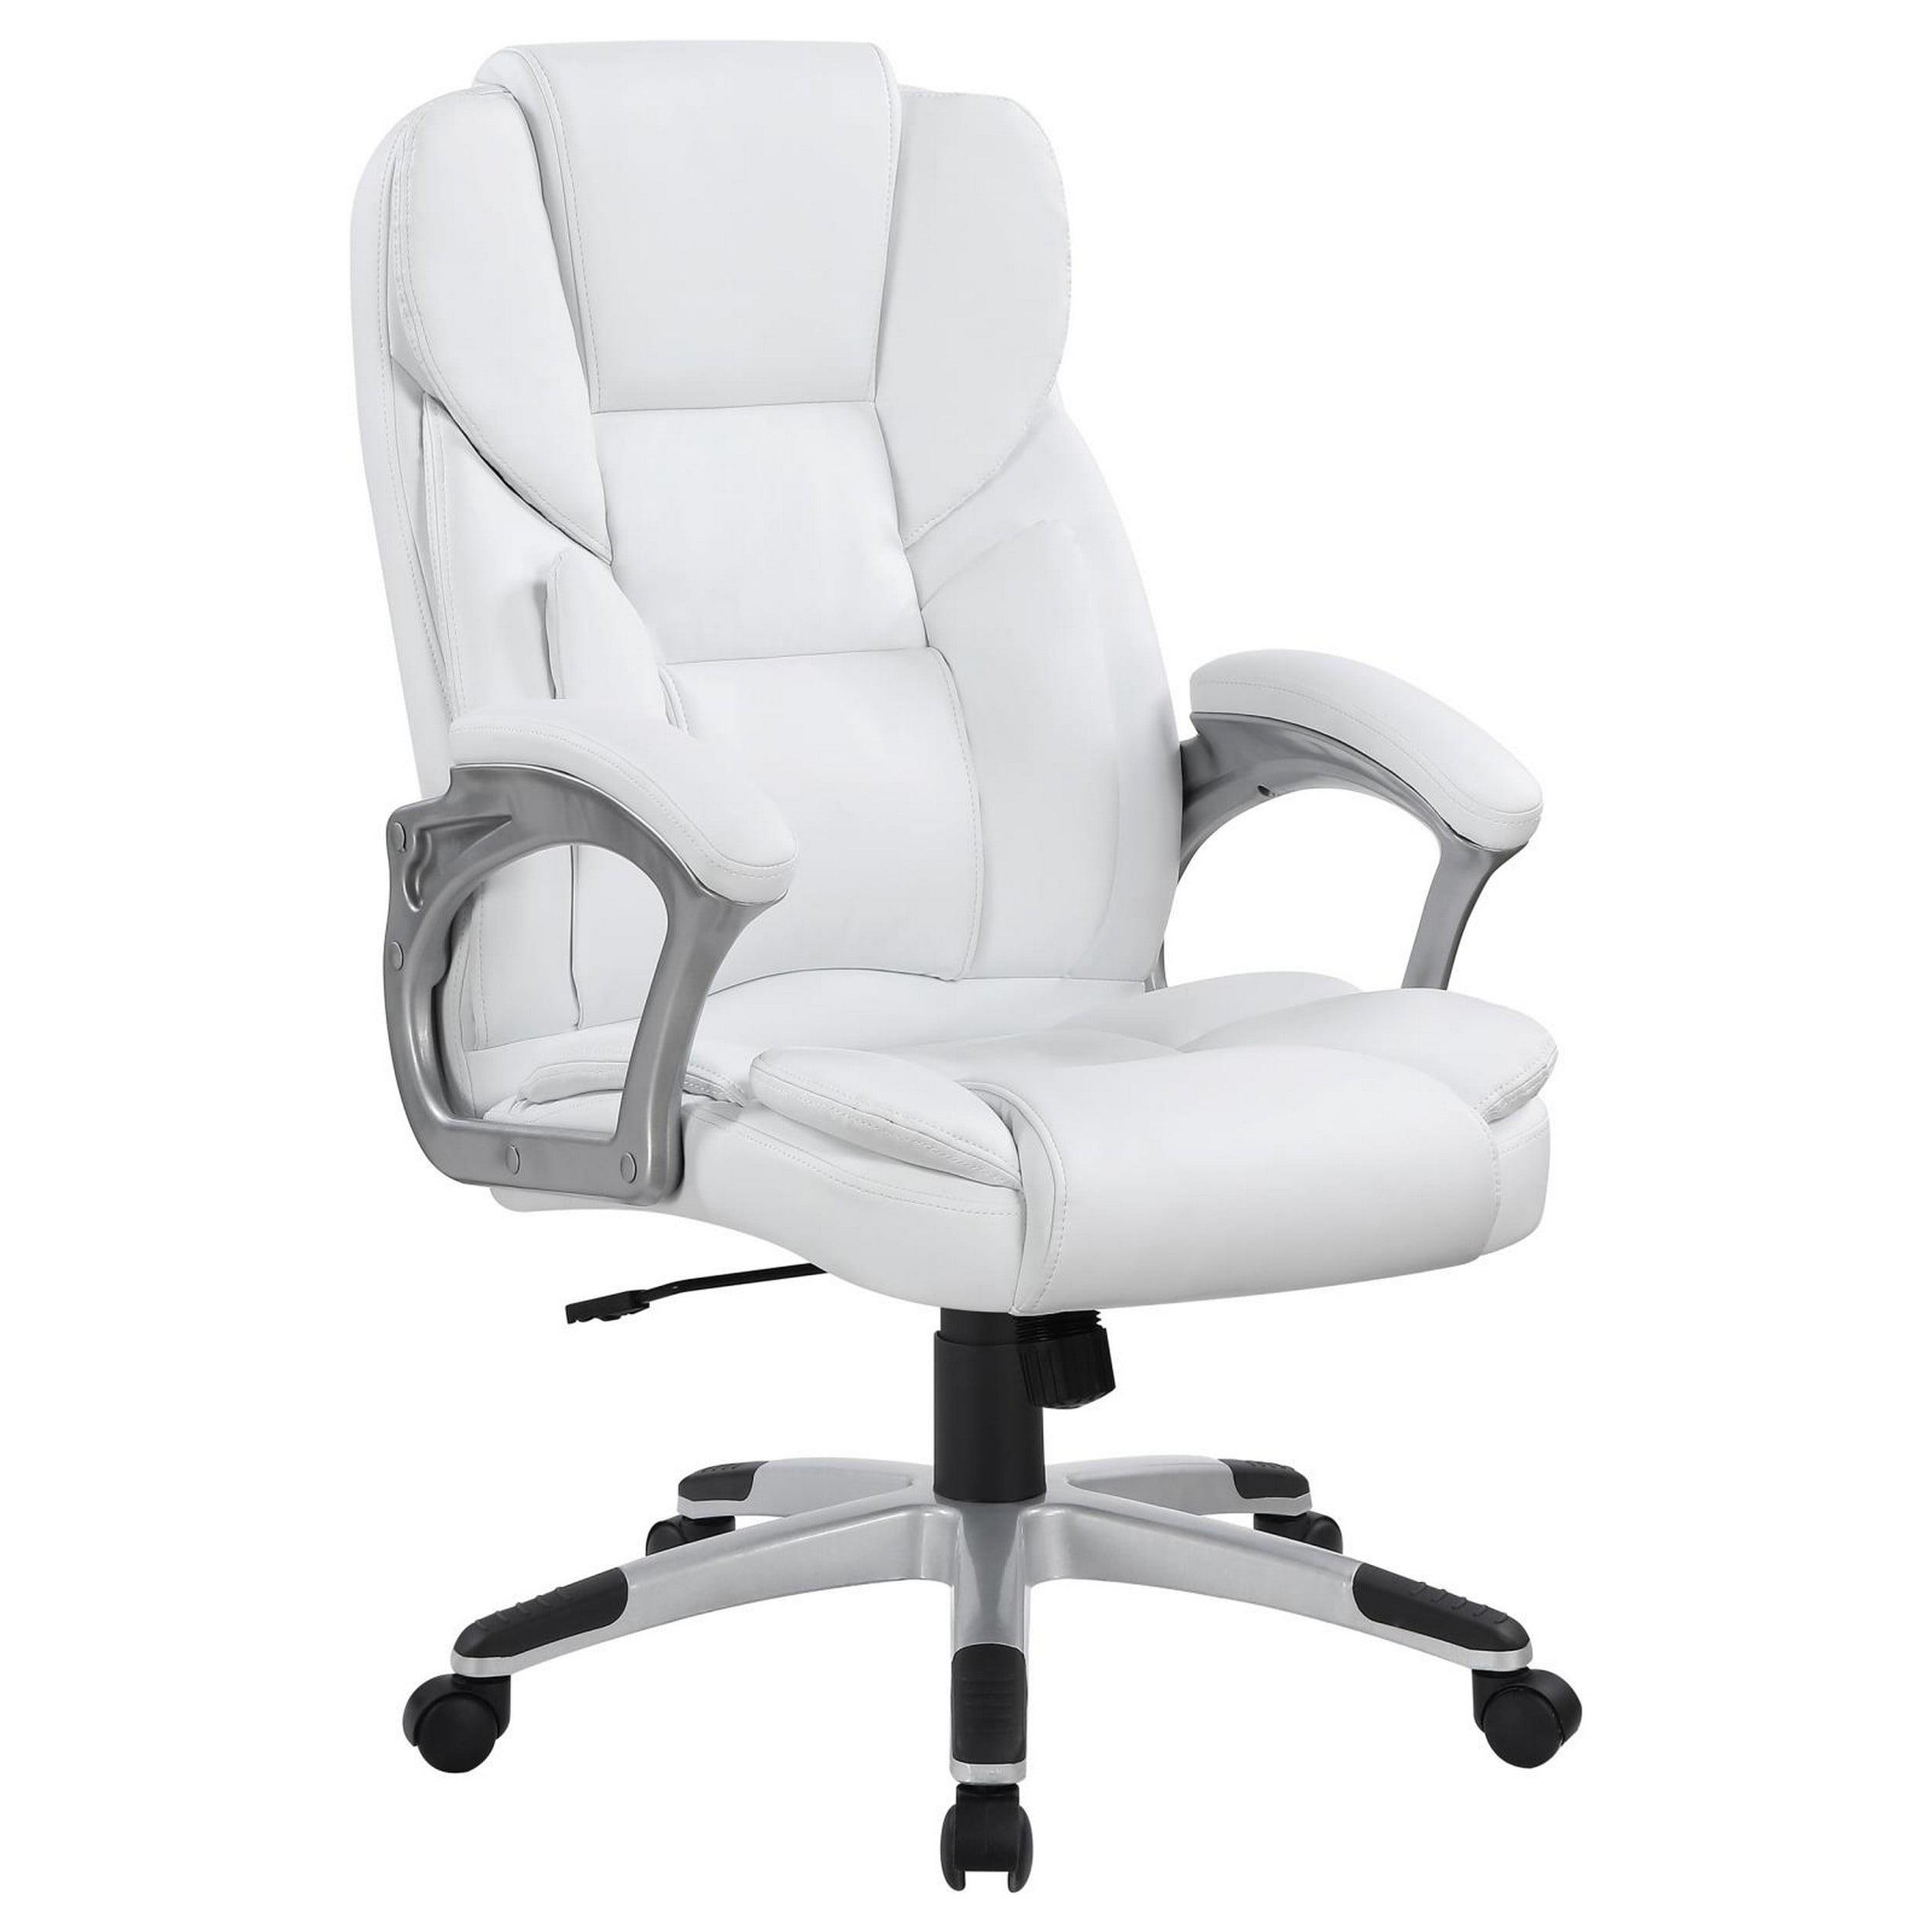 Transitional High-Back Swivel Executive Chair in White Faux Leather